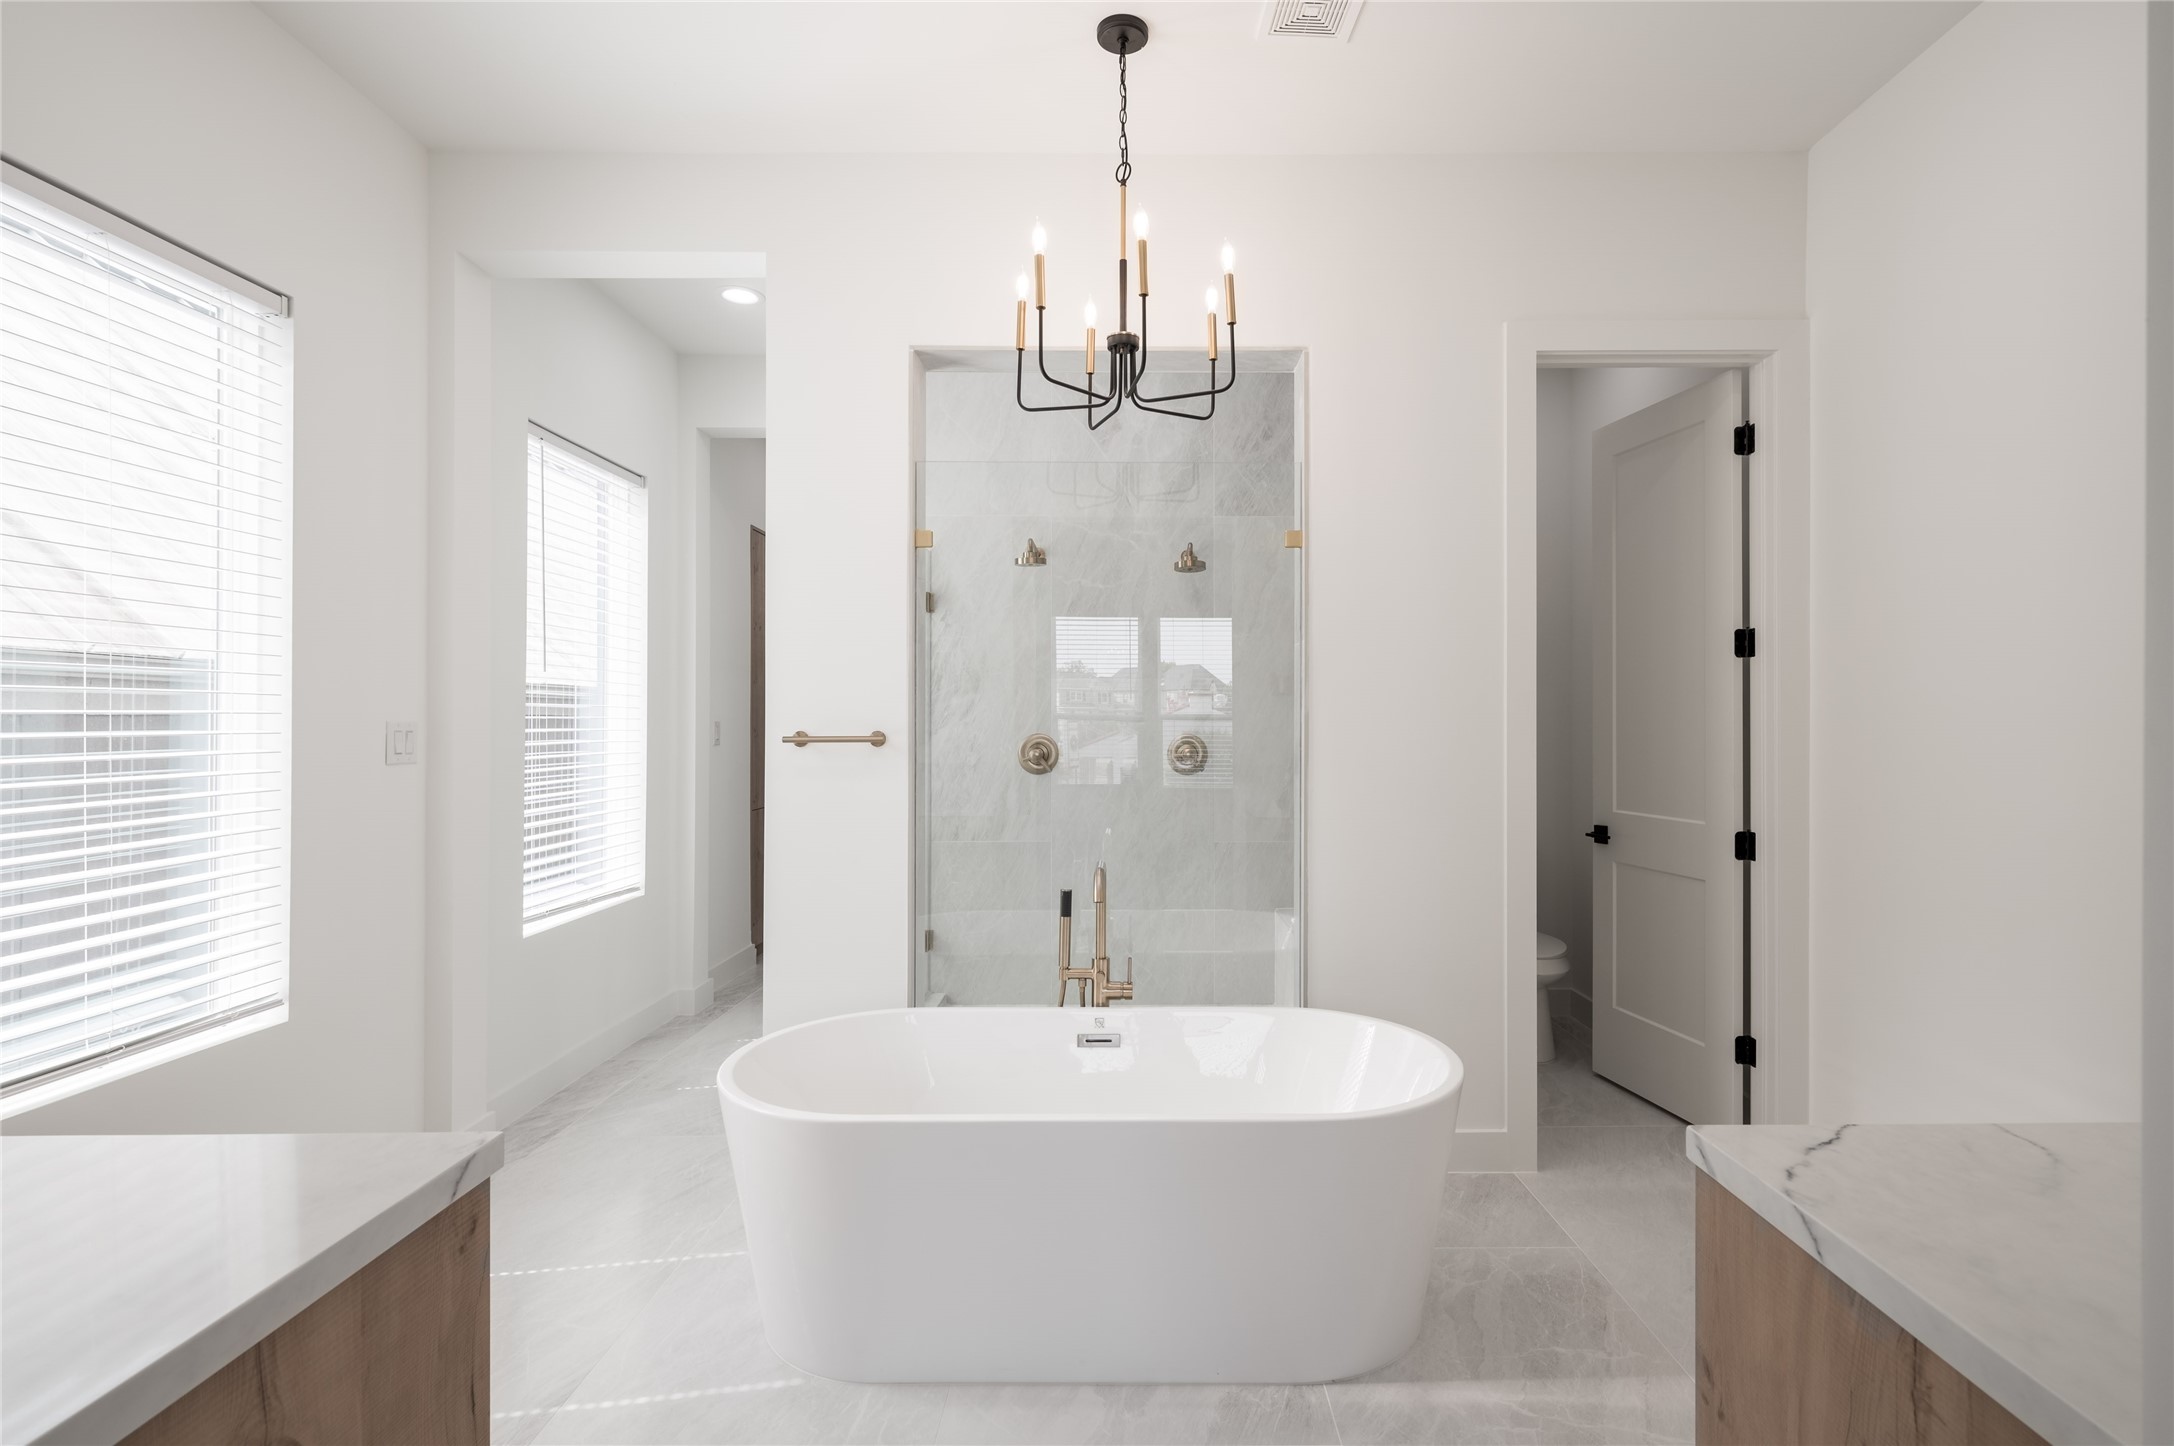 Stunning bath with soaker tub, oversized shower with 2 shower heads and separate, his and her vanities